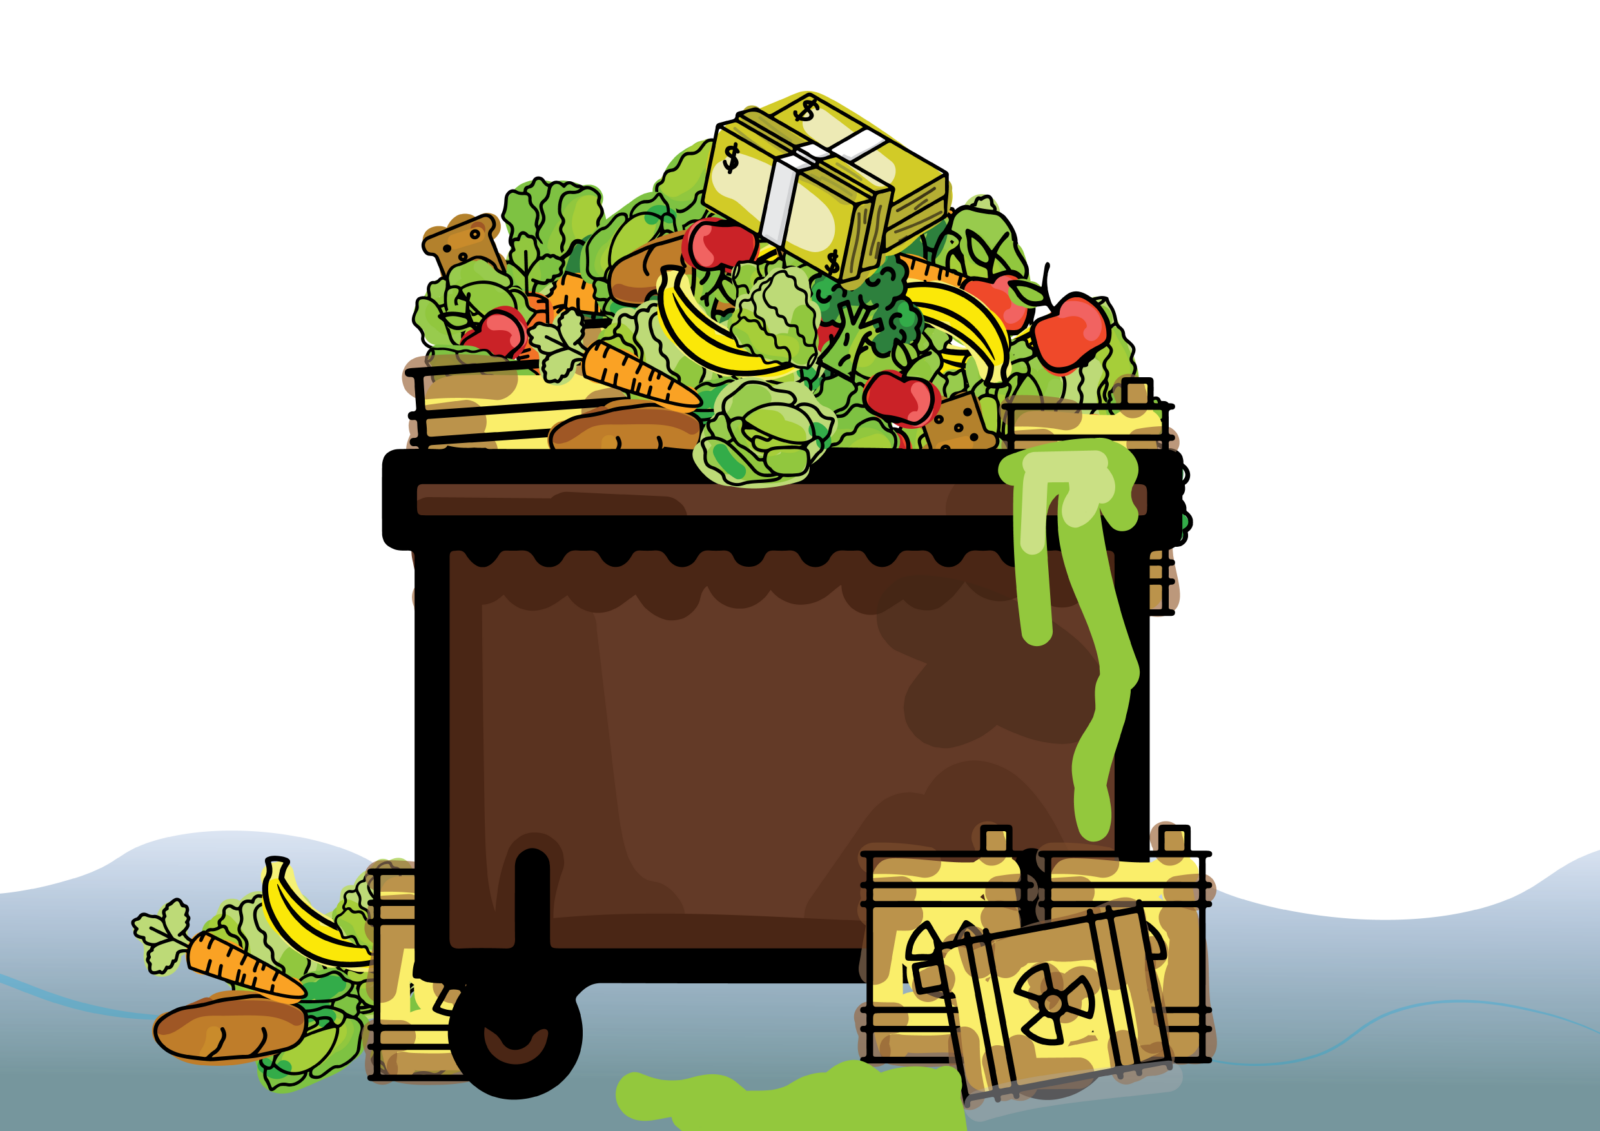 Stylised image of food waste in a dumpster. 